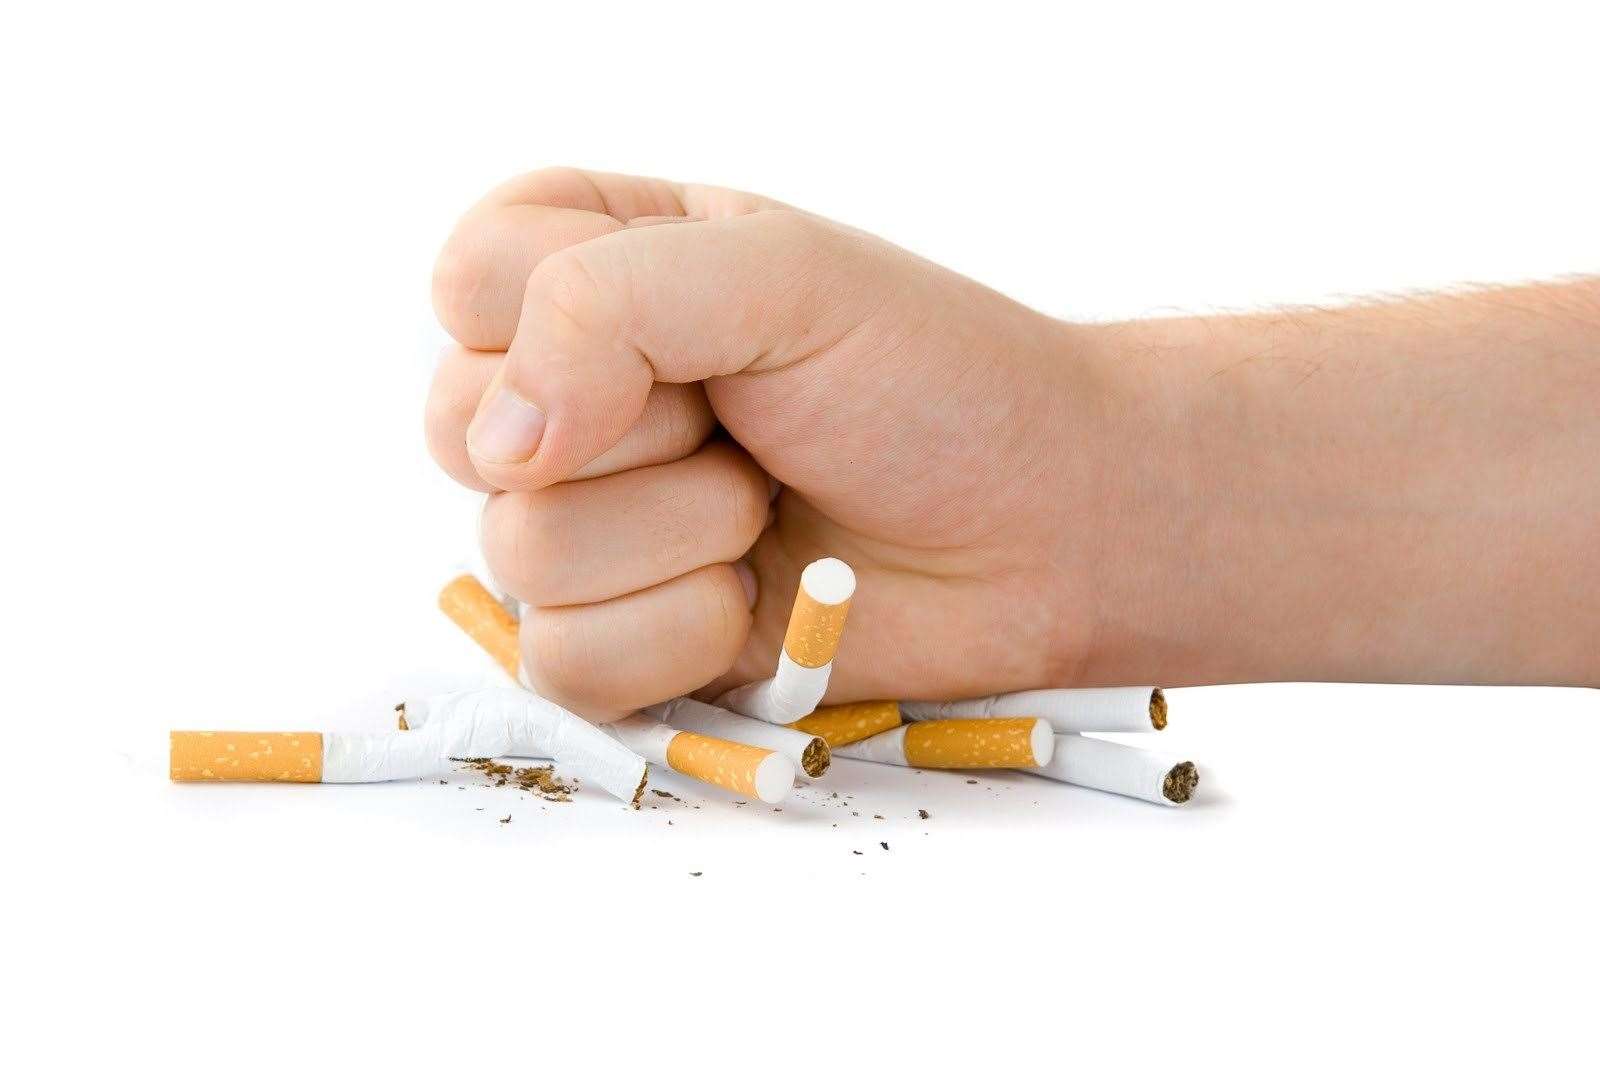 The number of smokers in Britain has halved in the past 20 years